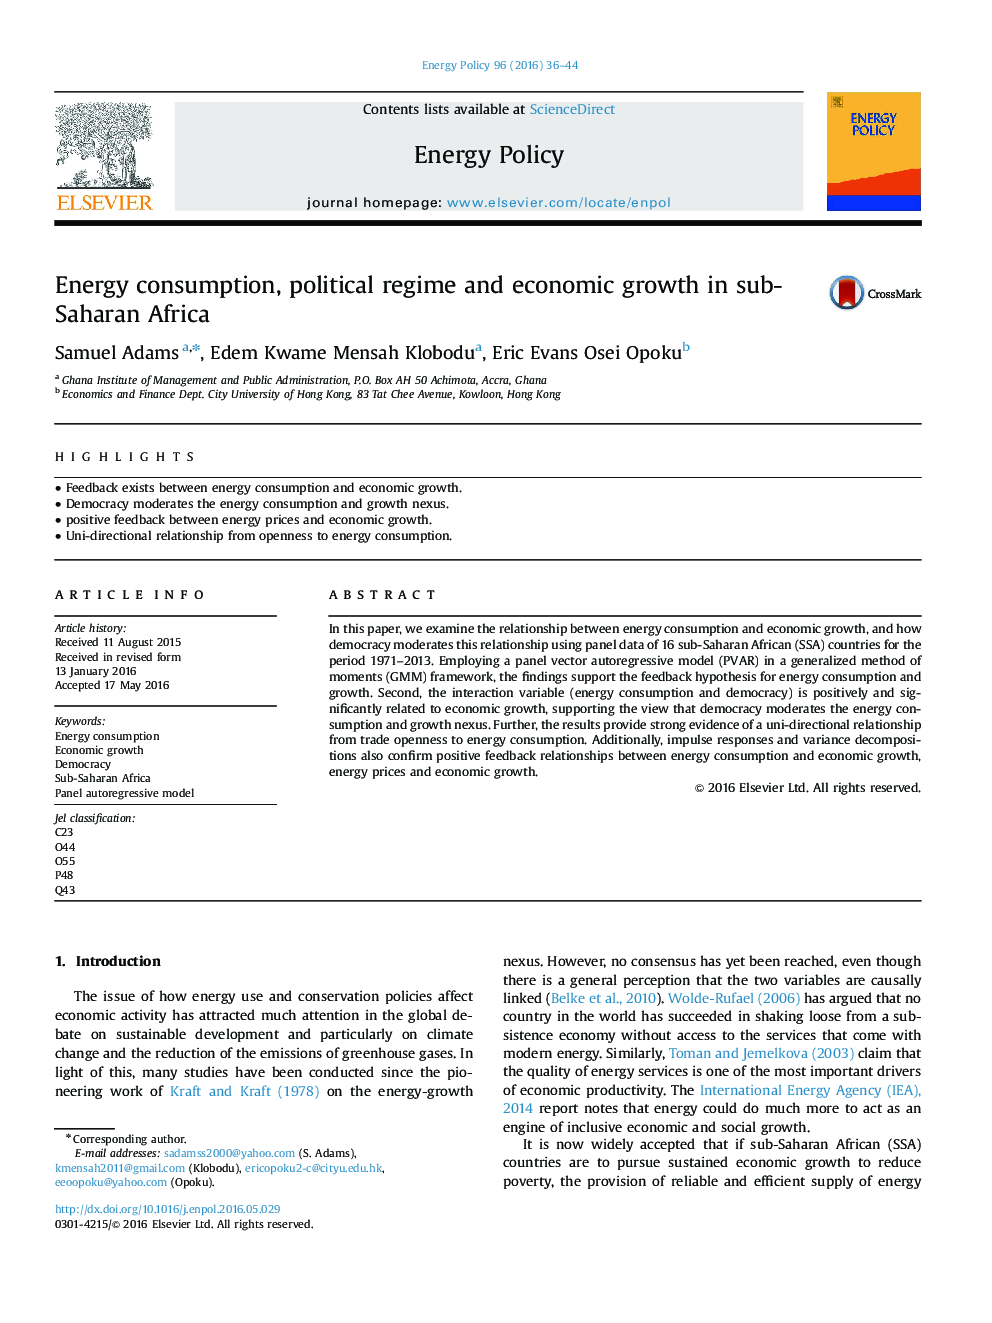 Energy consumption, political regime and economic growth in sub-Saharan Africa